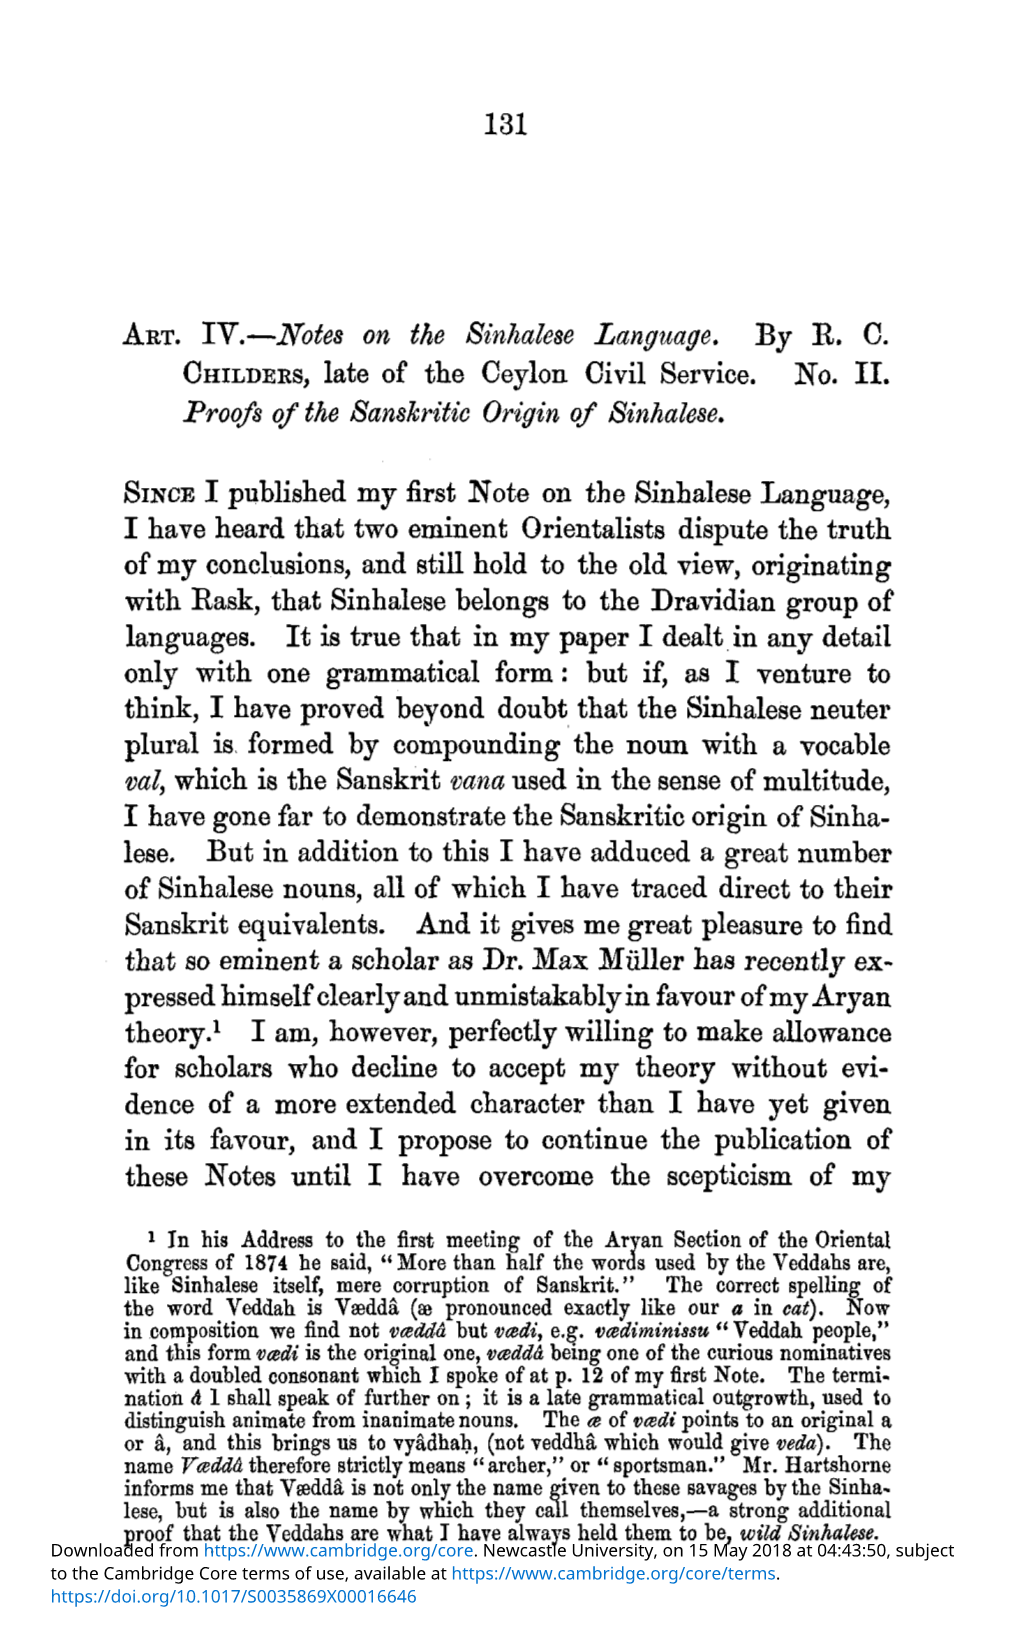 131 ART. IV.—Notes on the Sinhalese Language. by R. C. OHILDEES